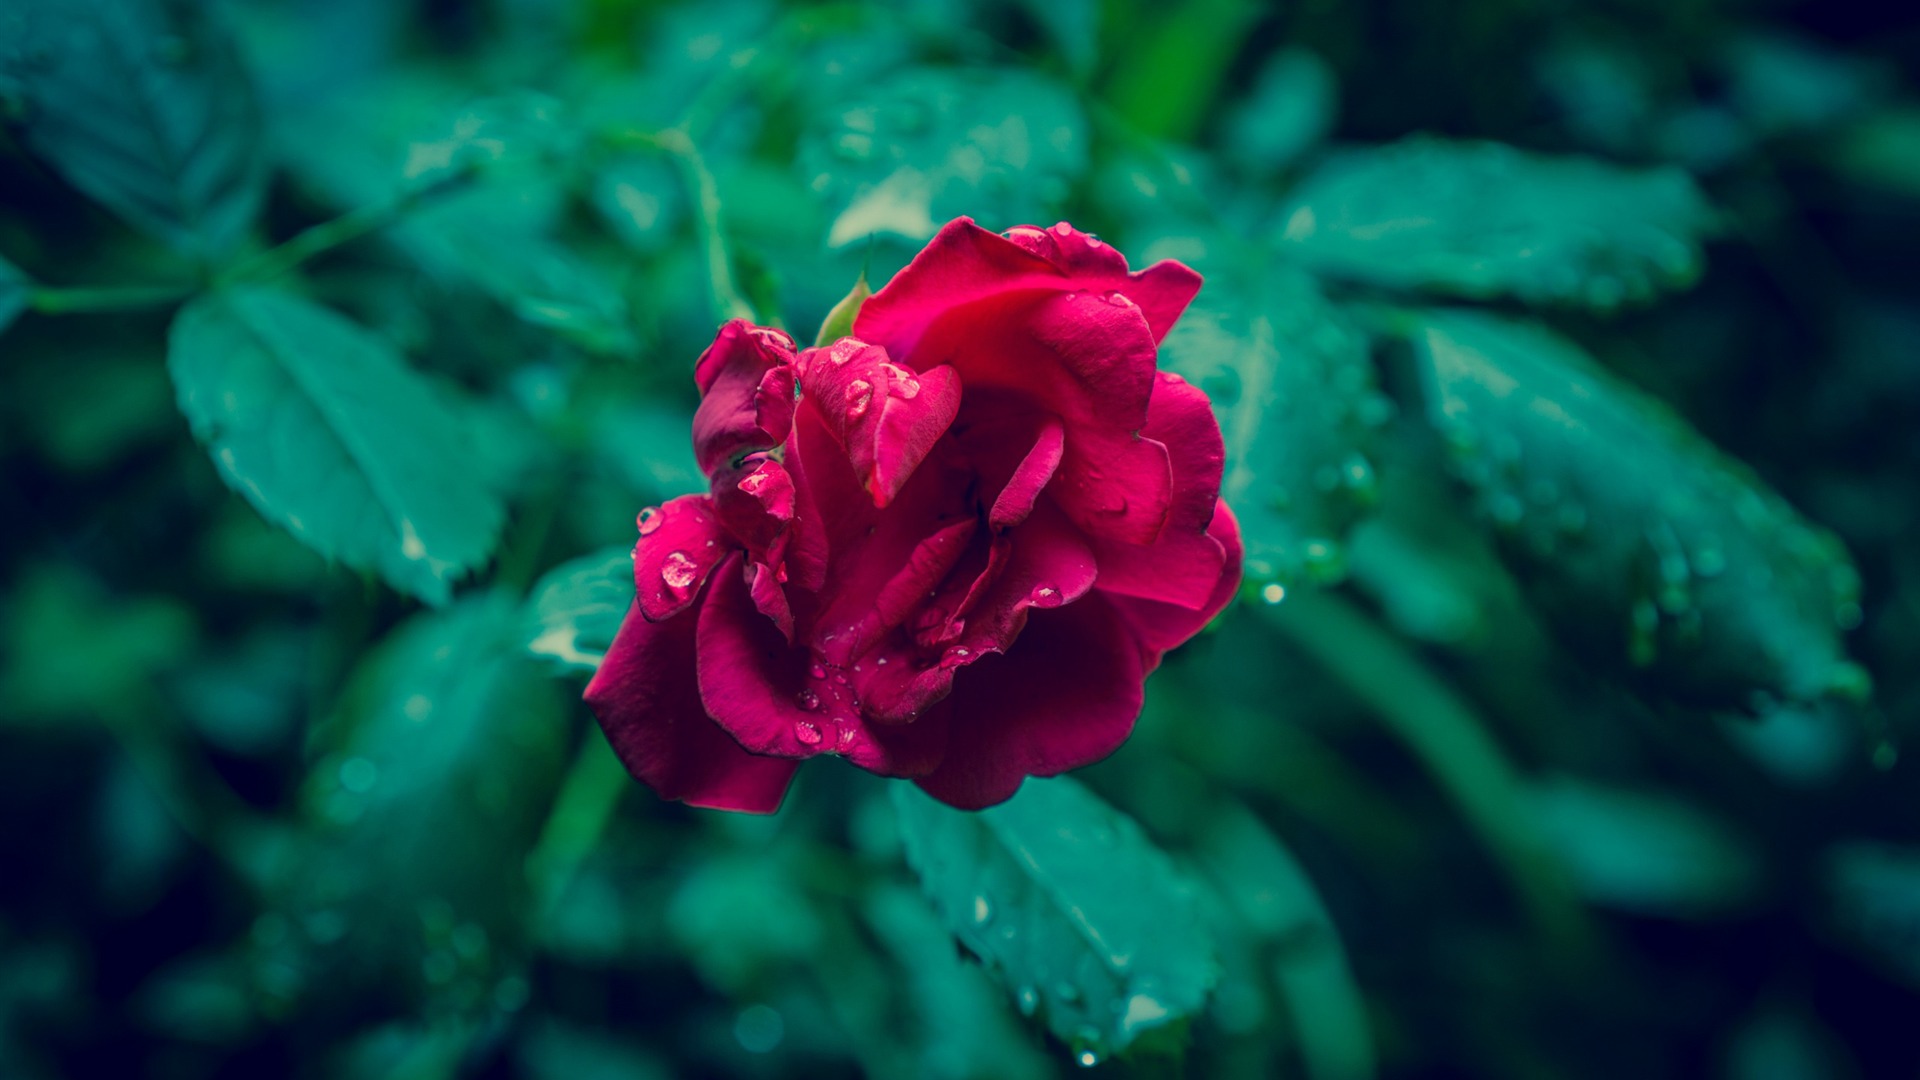 Red rose and green photo